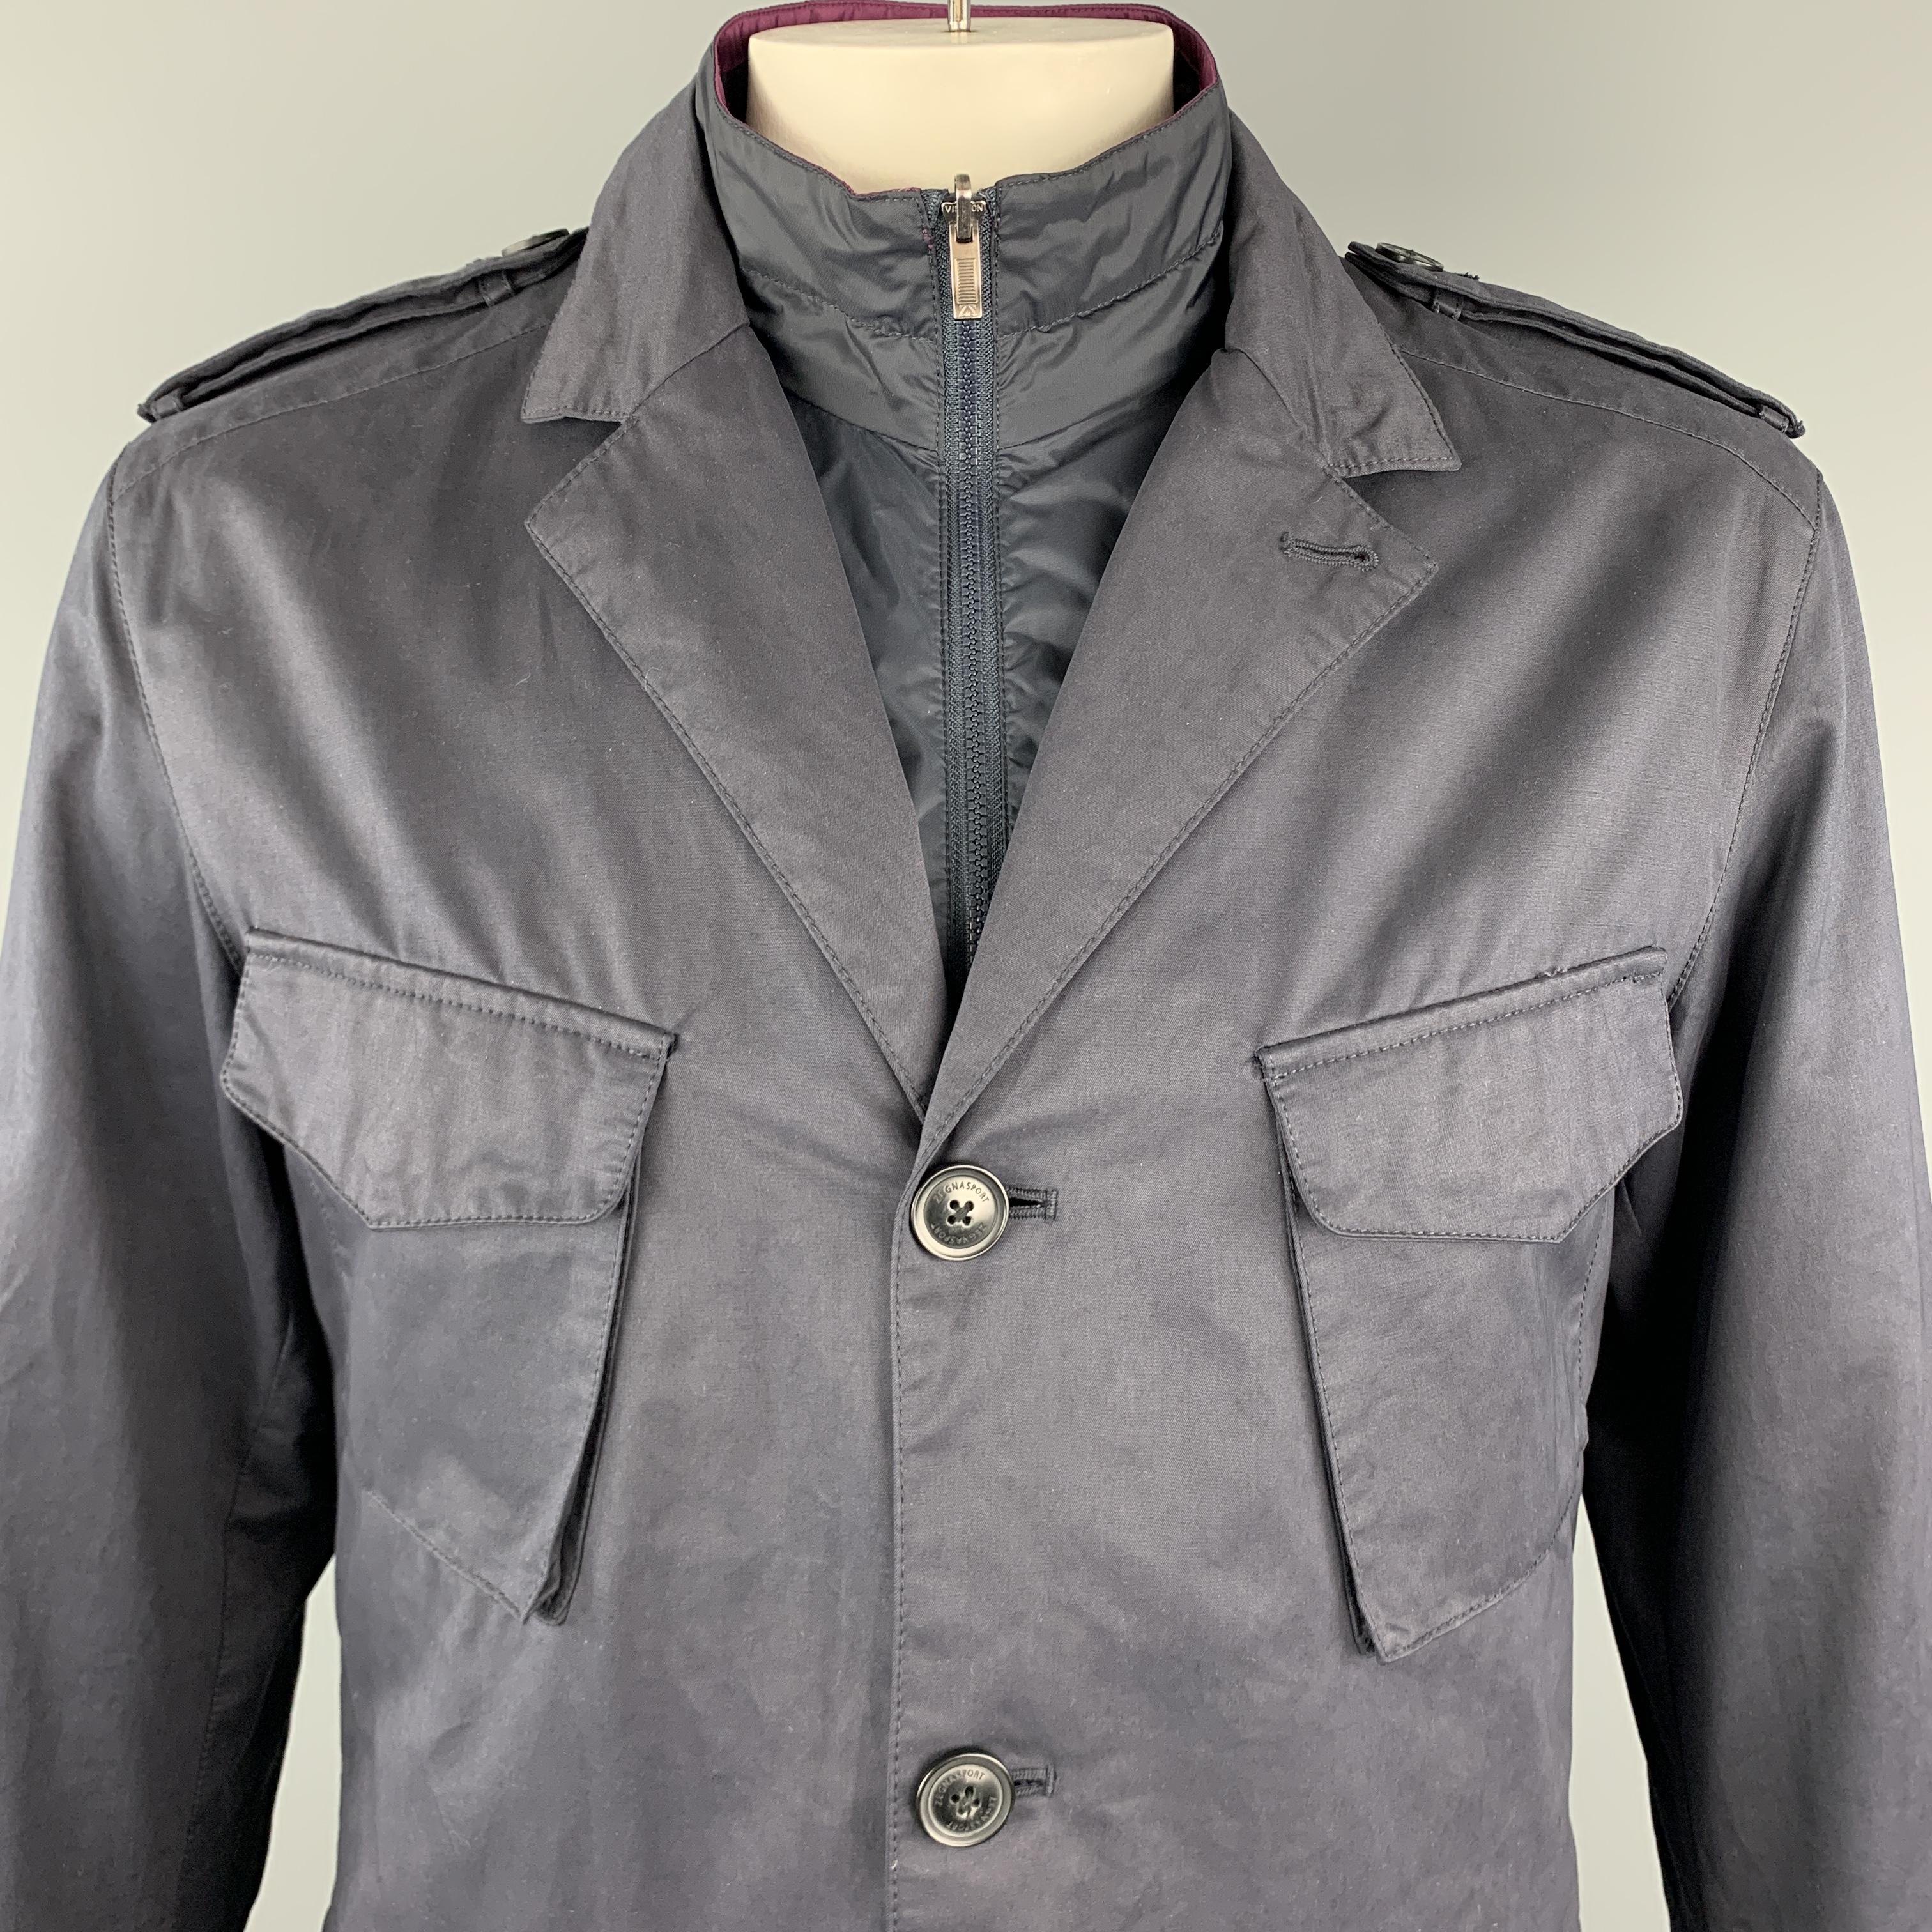 Z ZEGNA SPORT military style jacket comes in navy blue waterproof 